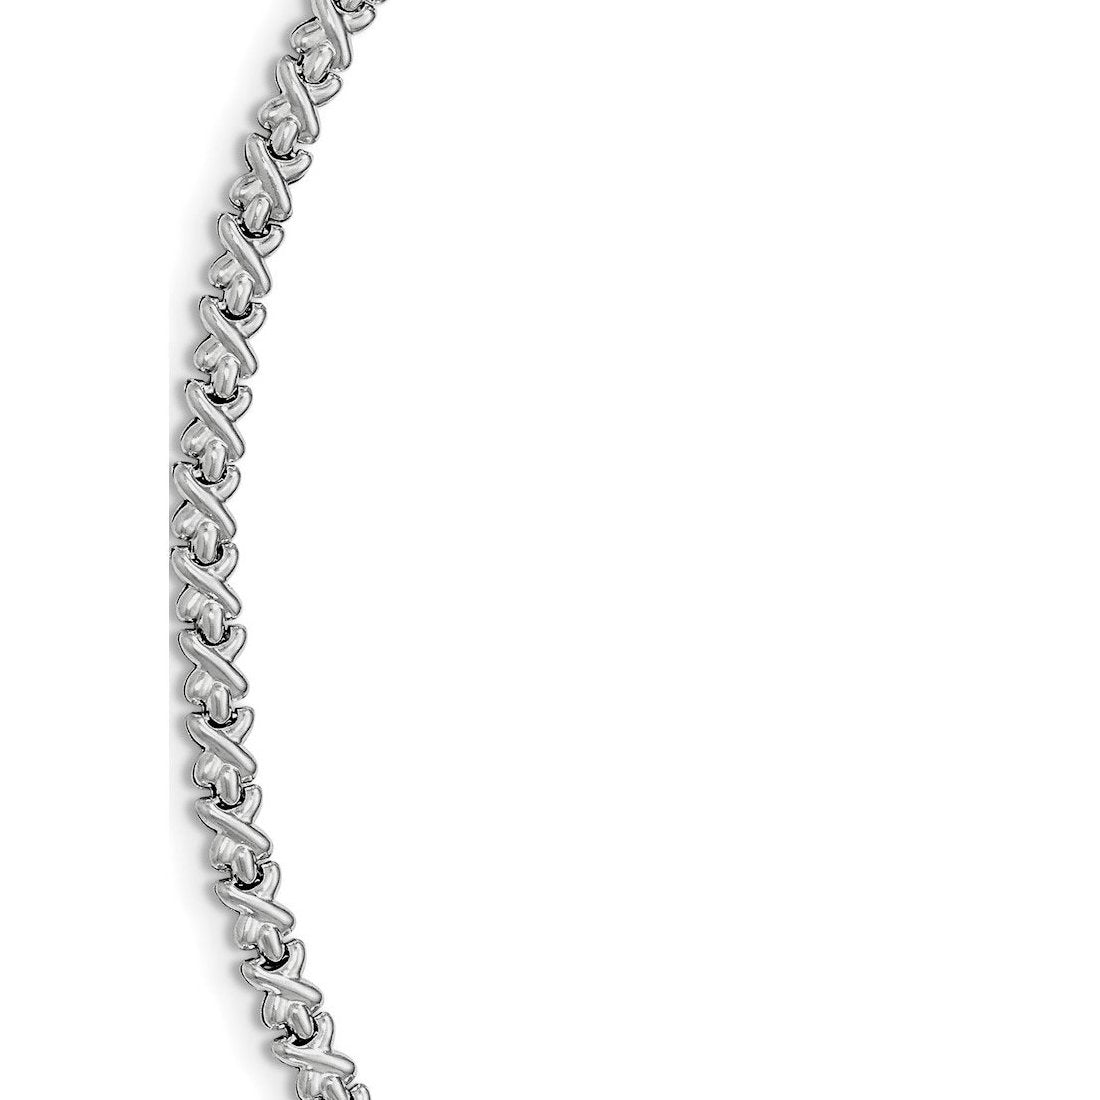 1.8MMCriss Cross Chain .925 Solid Sterling Silver Sizes "16-24"